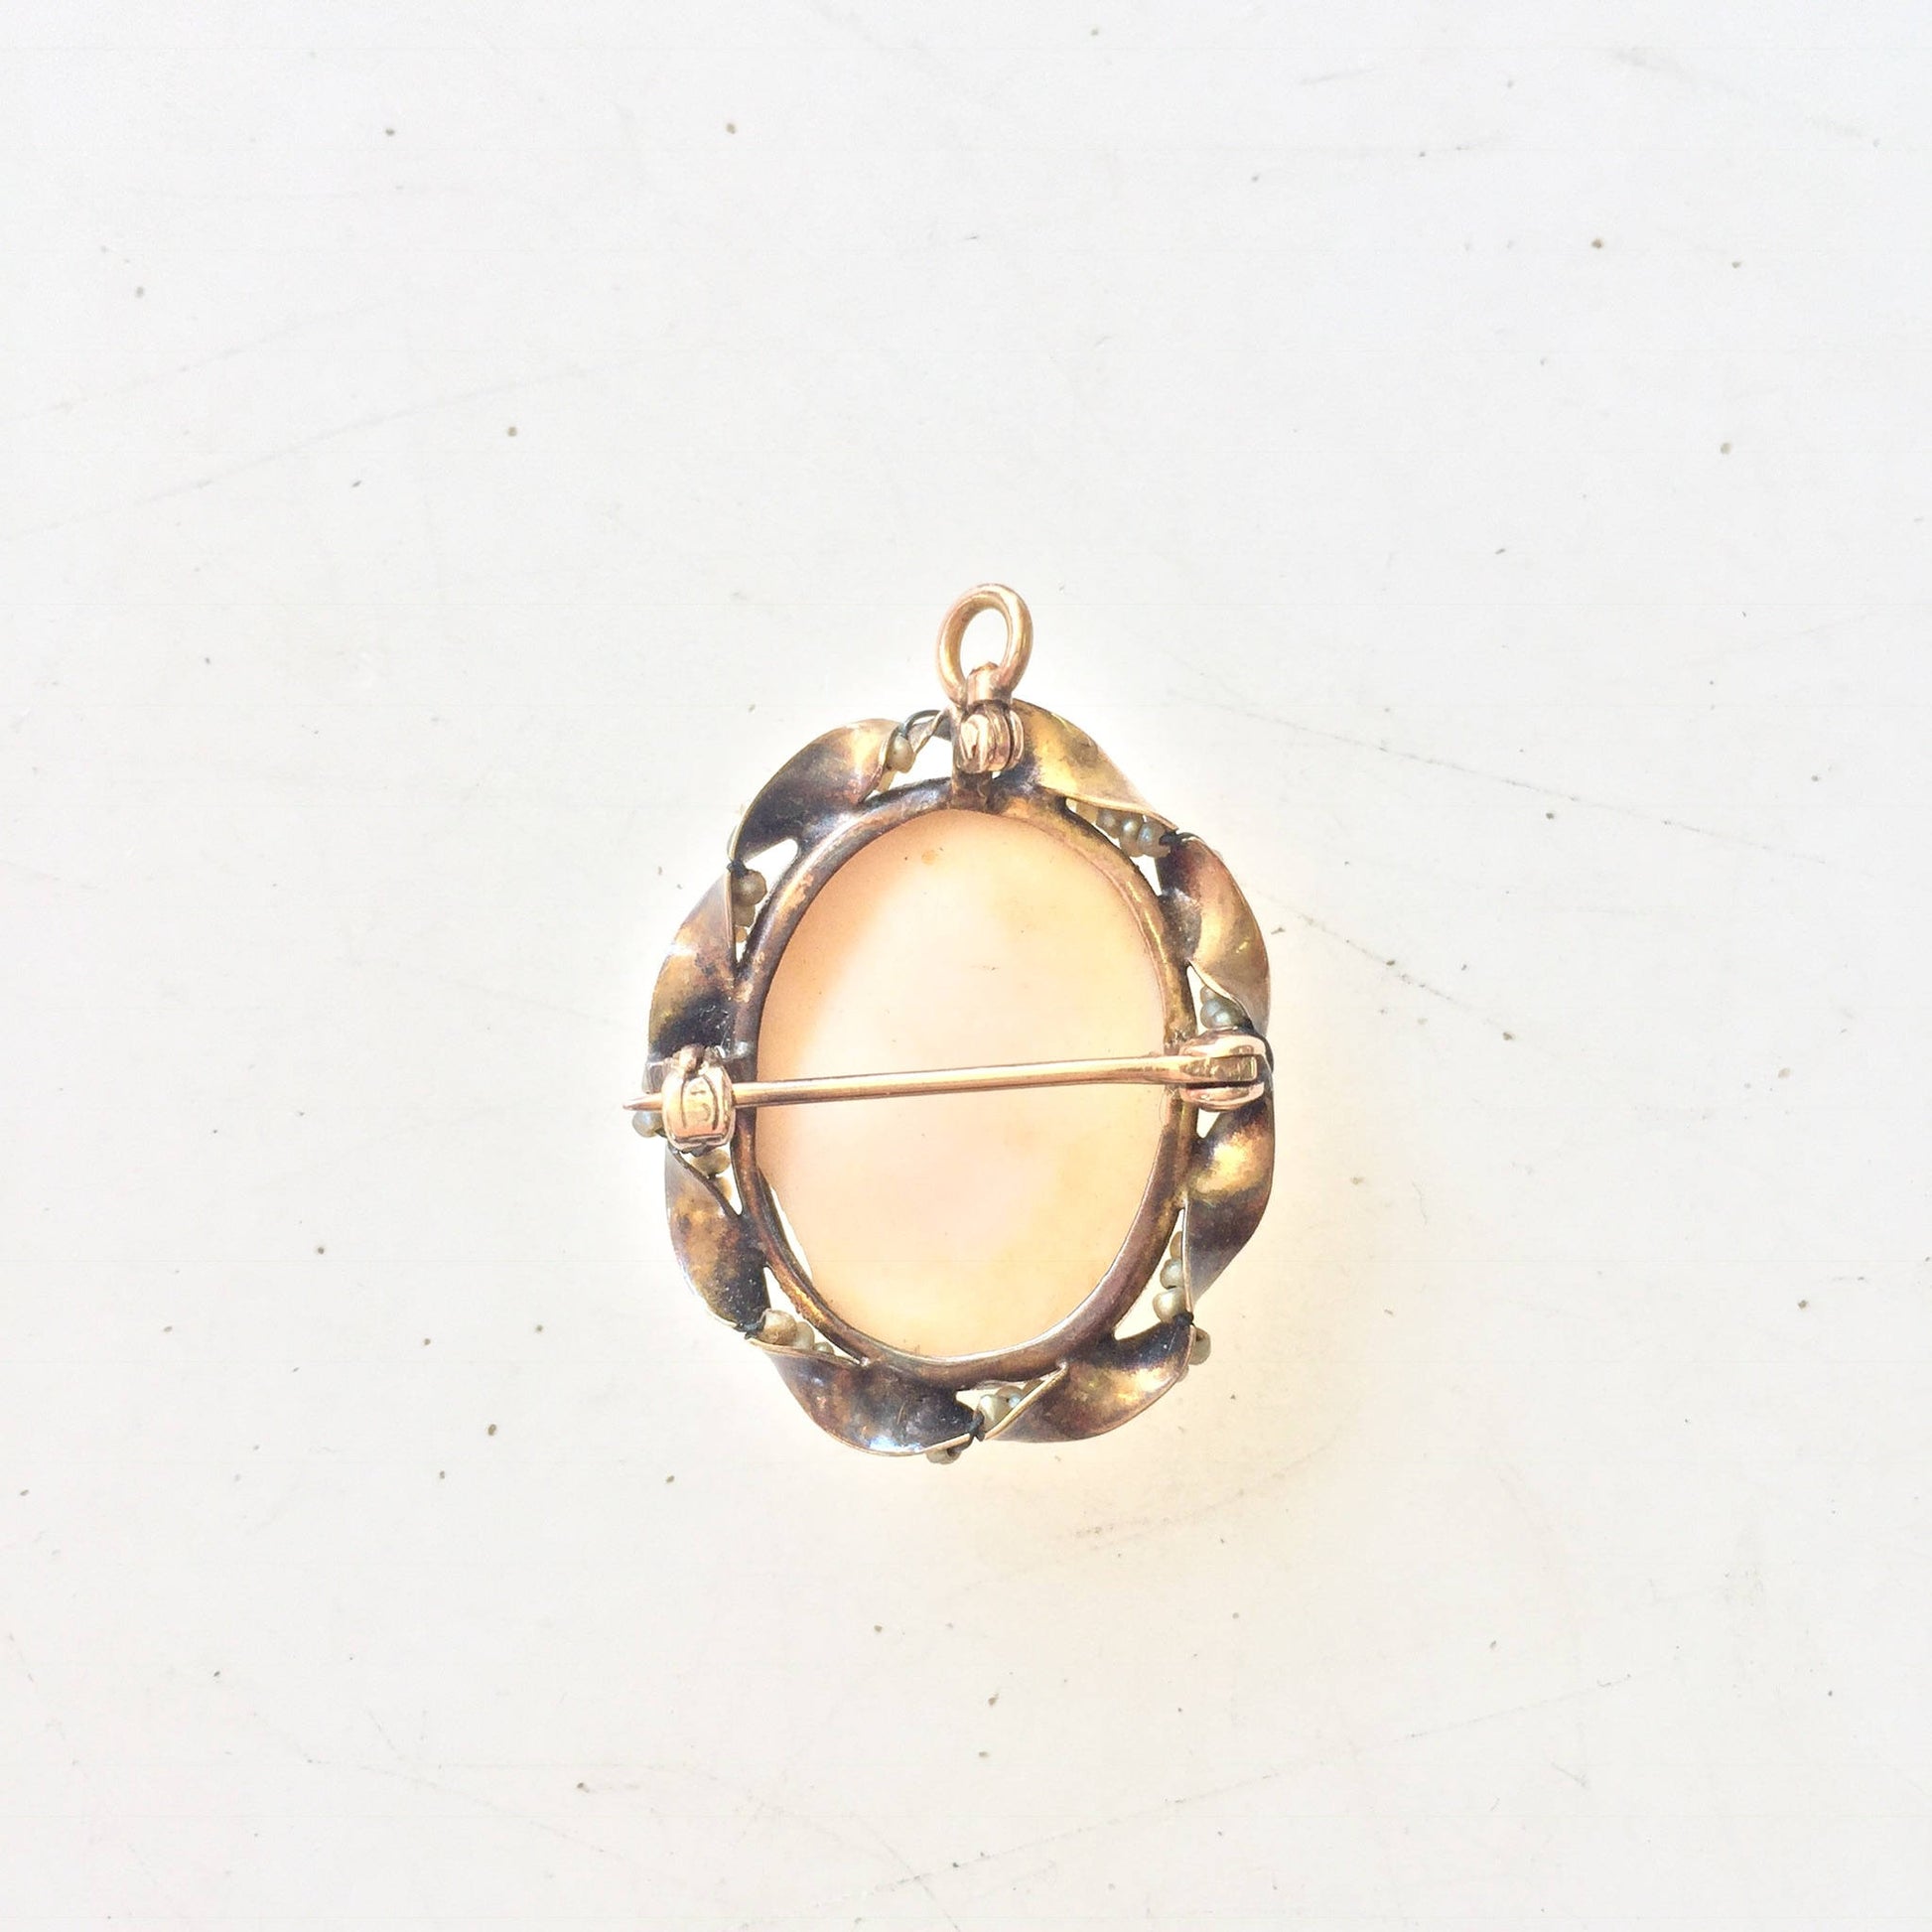 10 karat yellow gold vintage cameo brooch or pendant featuring an oval shell cameo set in an ornate frame with bead and rope detailing around the edge, photographed on a plain white background.